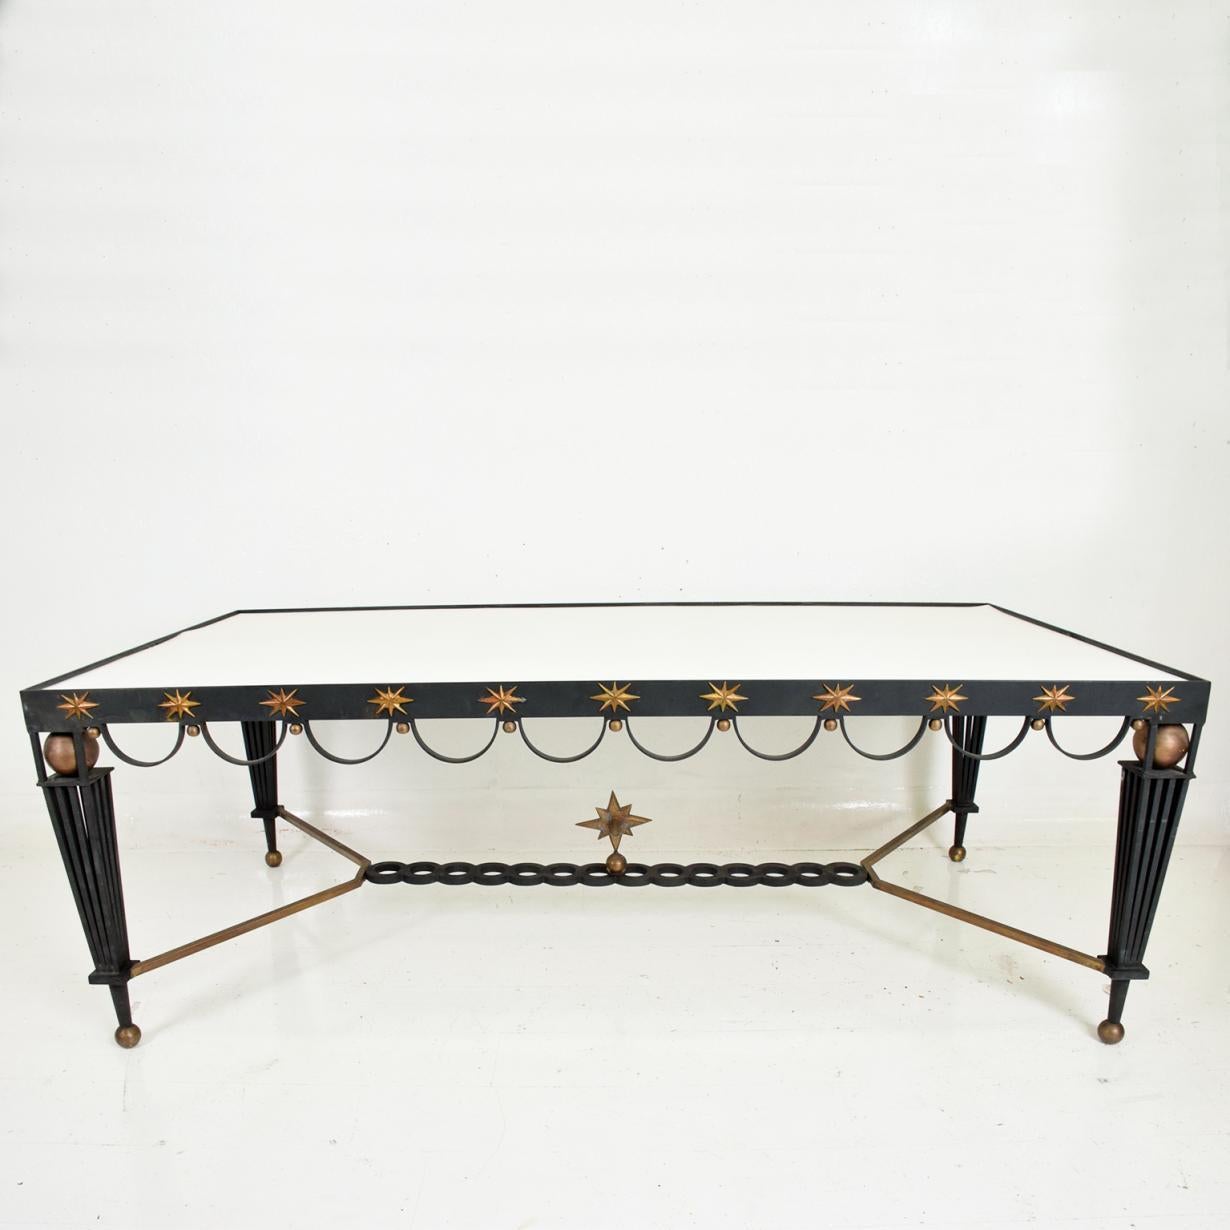 For your consideration, a midcentury Mexican modernist star dining table attributed to Arturo Pani. Made in Mexico circa 1950s. Iron painted in black with bronze accents.
There is no tabletop included.
Dimensions: 82 3/4